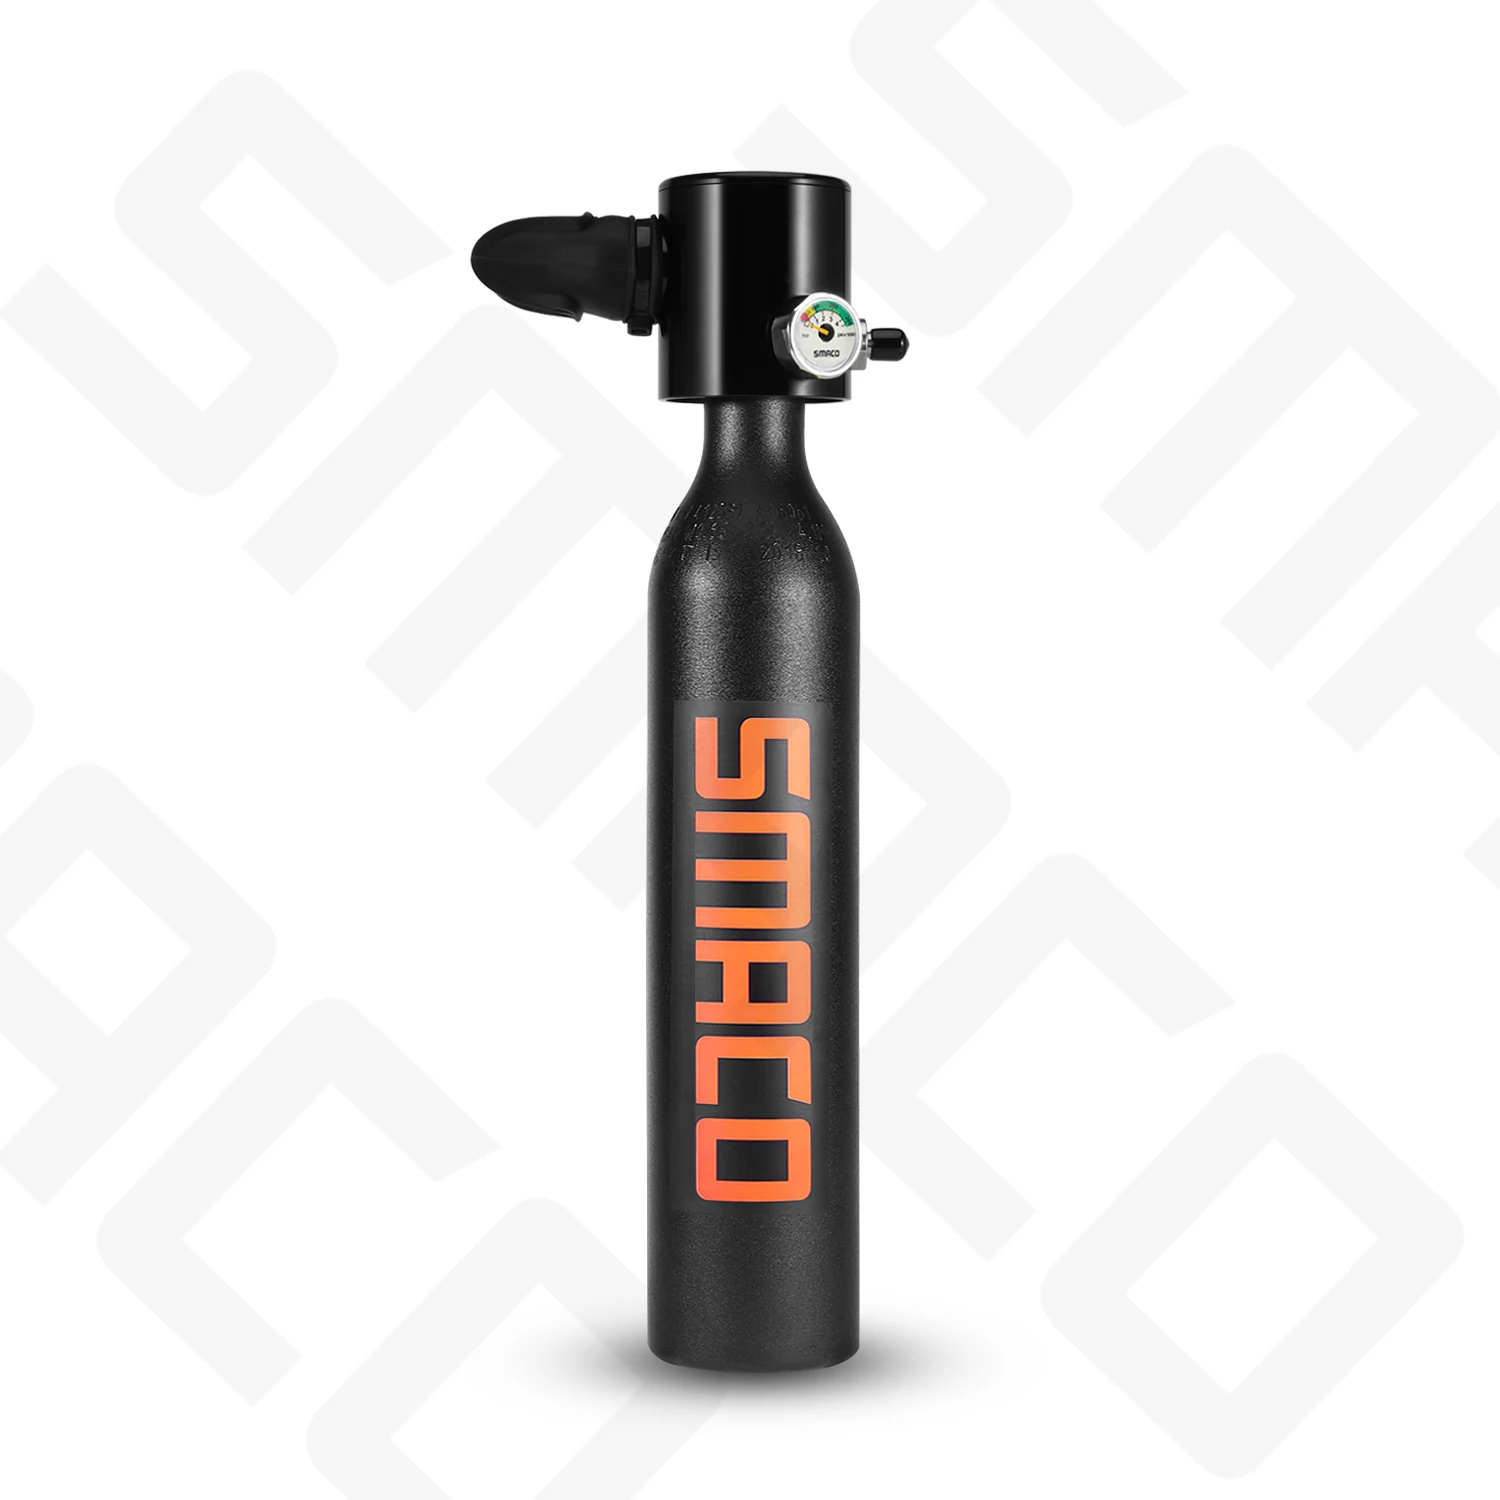 SMACO Diving Equipment oxygen cylinder set Mini scuba tank total freedom breath underwater for 5 para 10 minutos